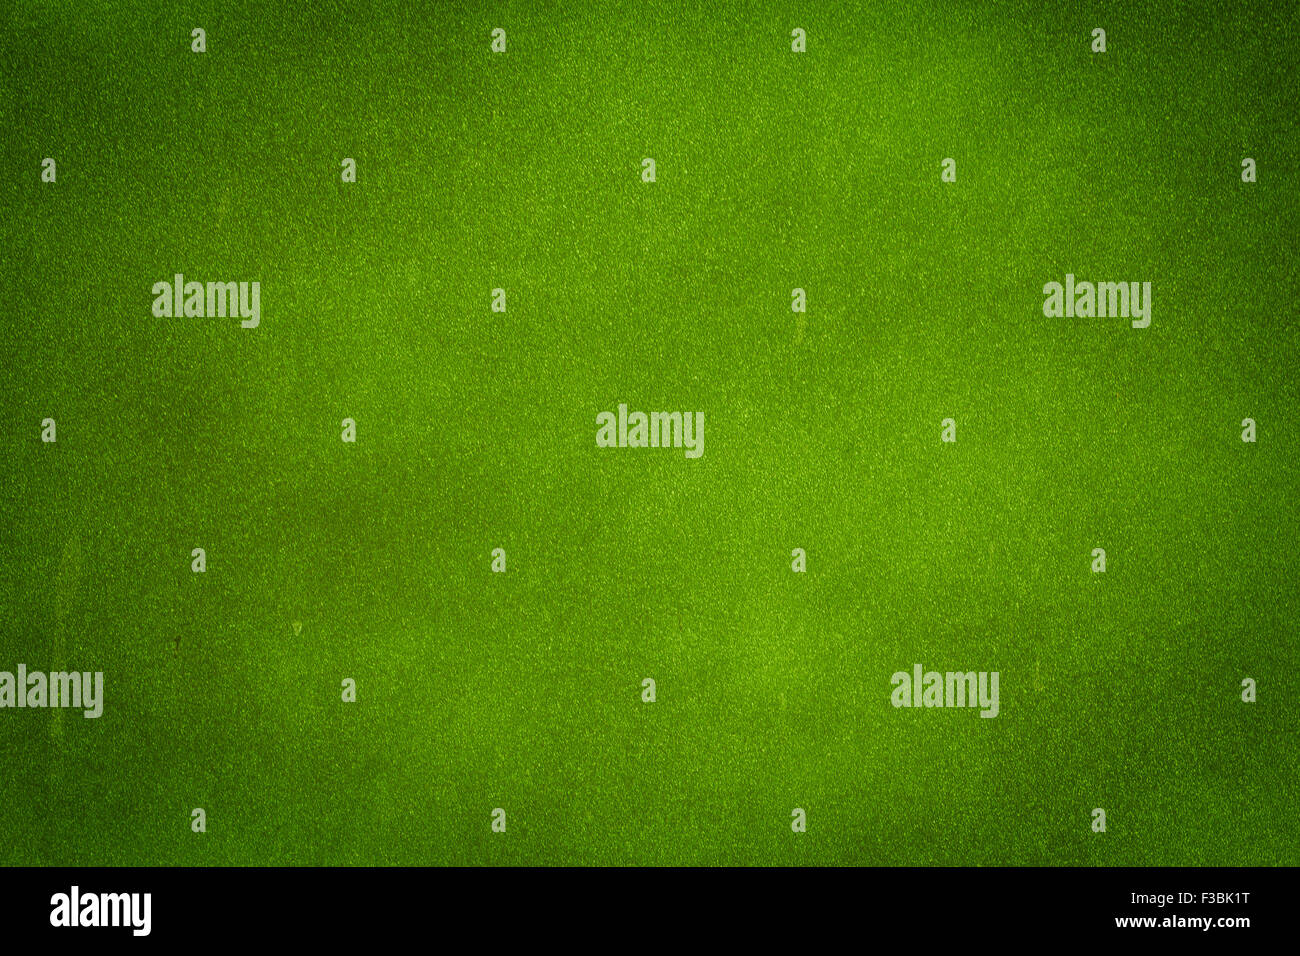 Green grunge wall background with dark spots Stock Photo